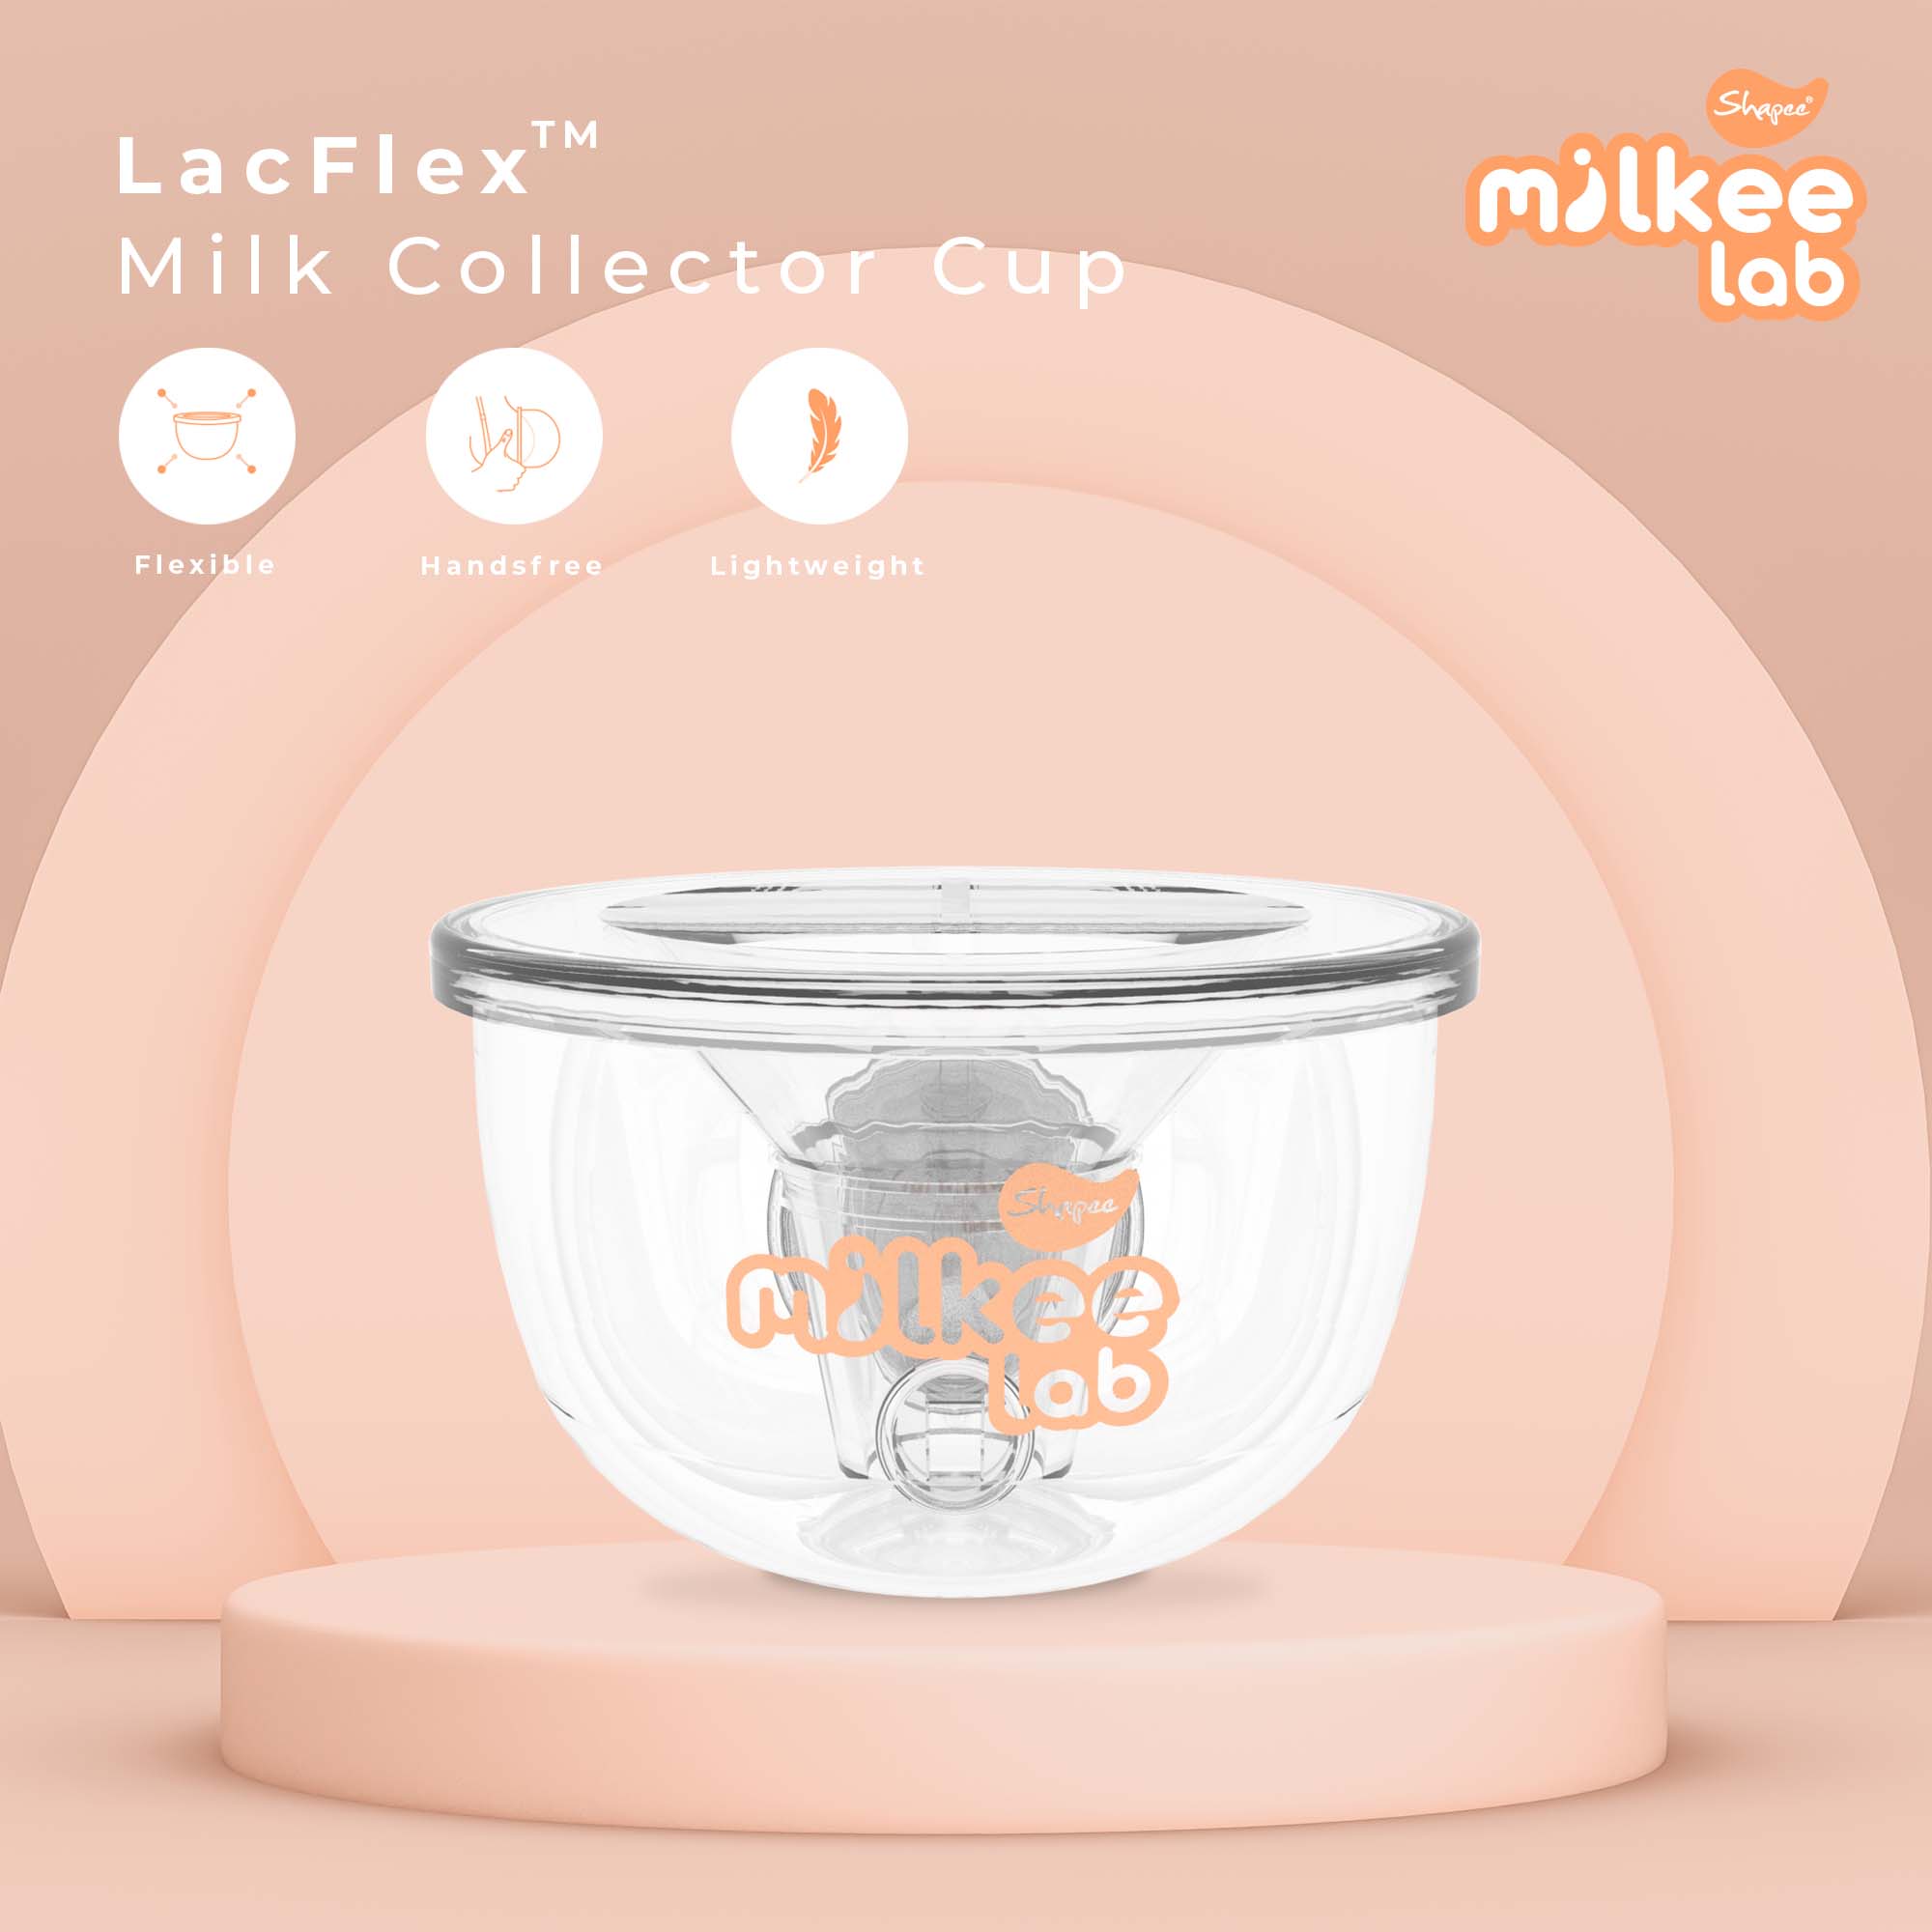 3.3 Sales Shapee Milkee Lab LacFlex Silicone Handsfree Collection